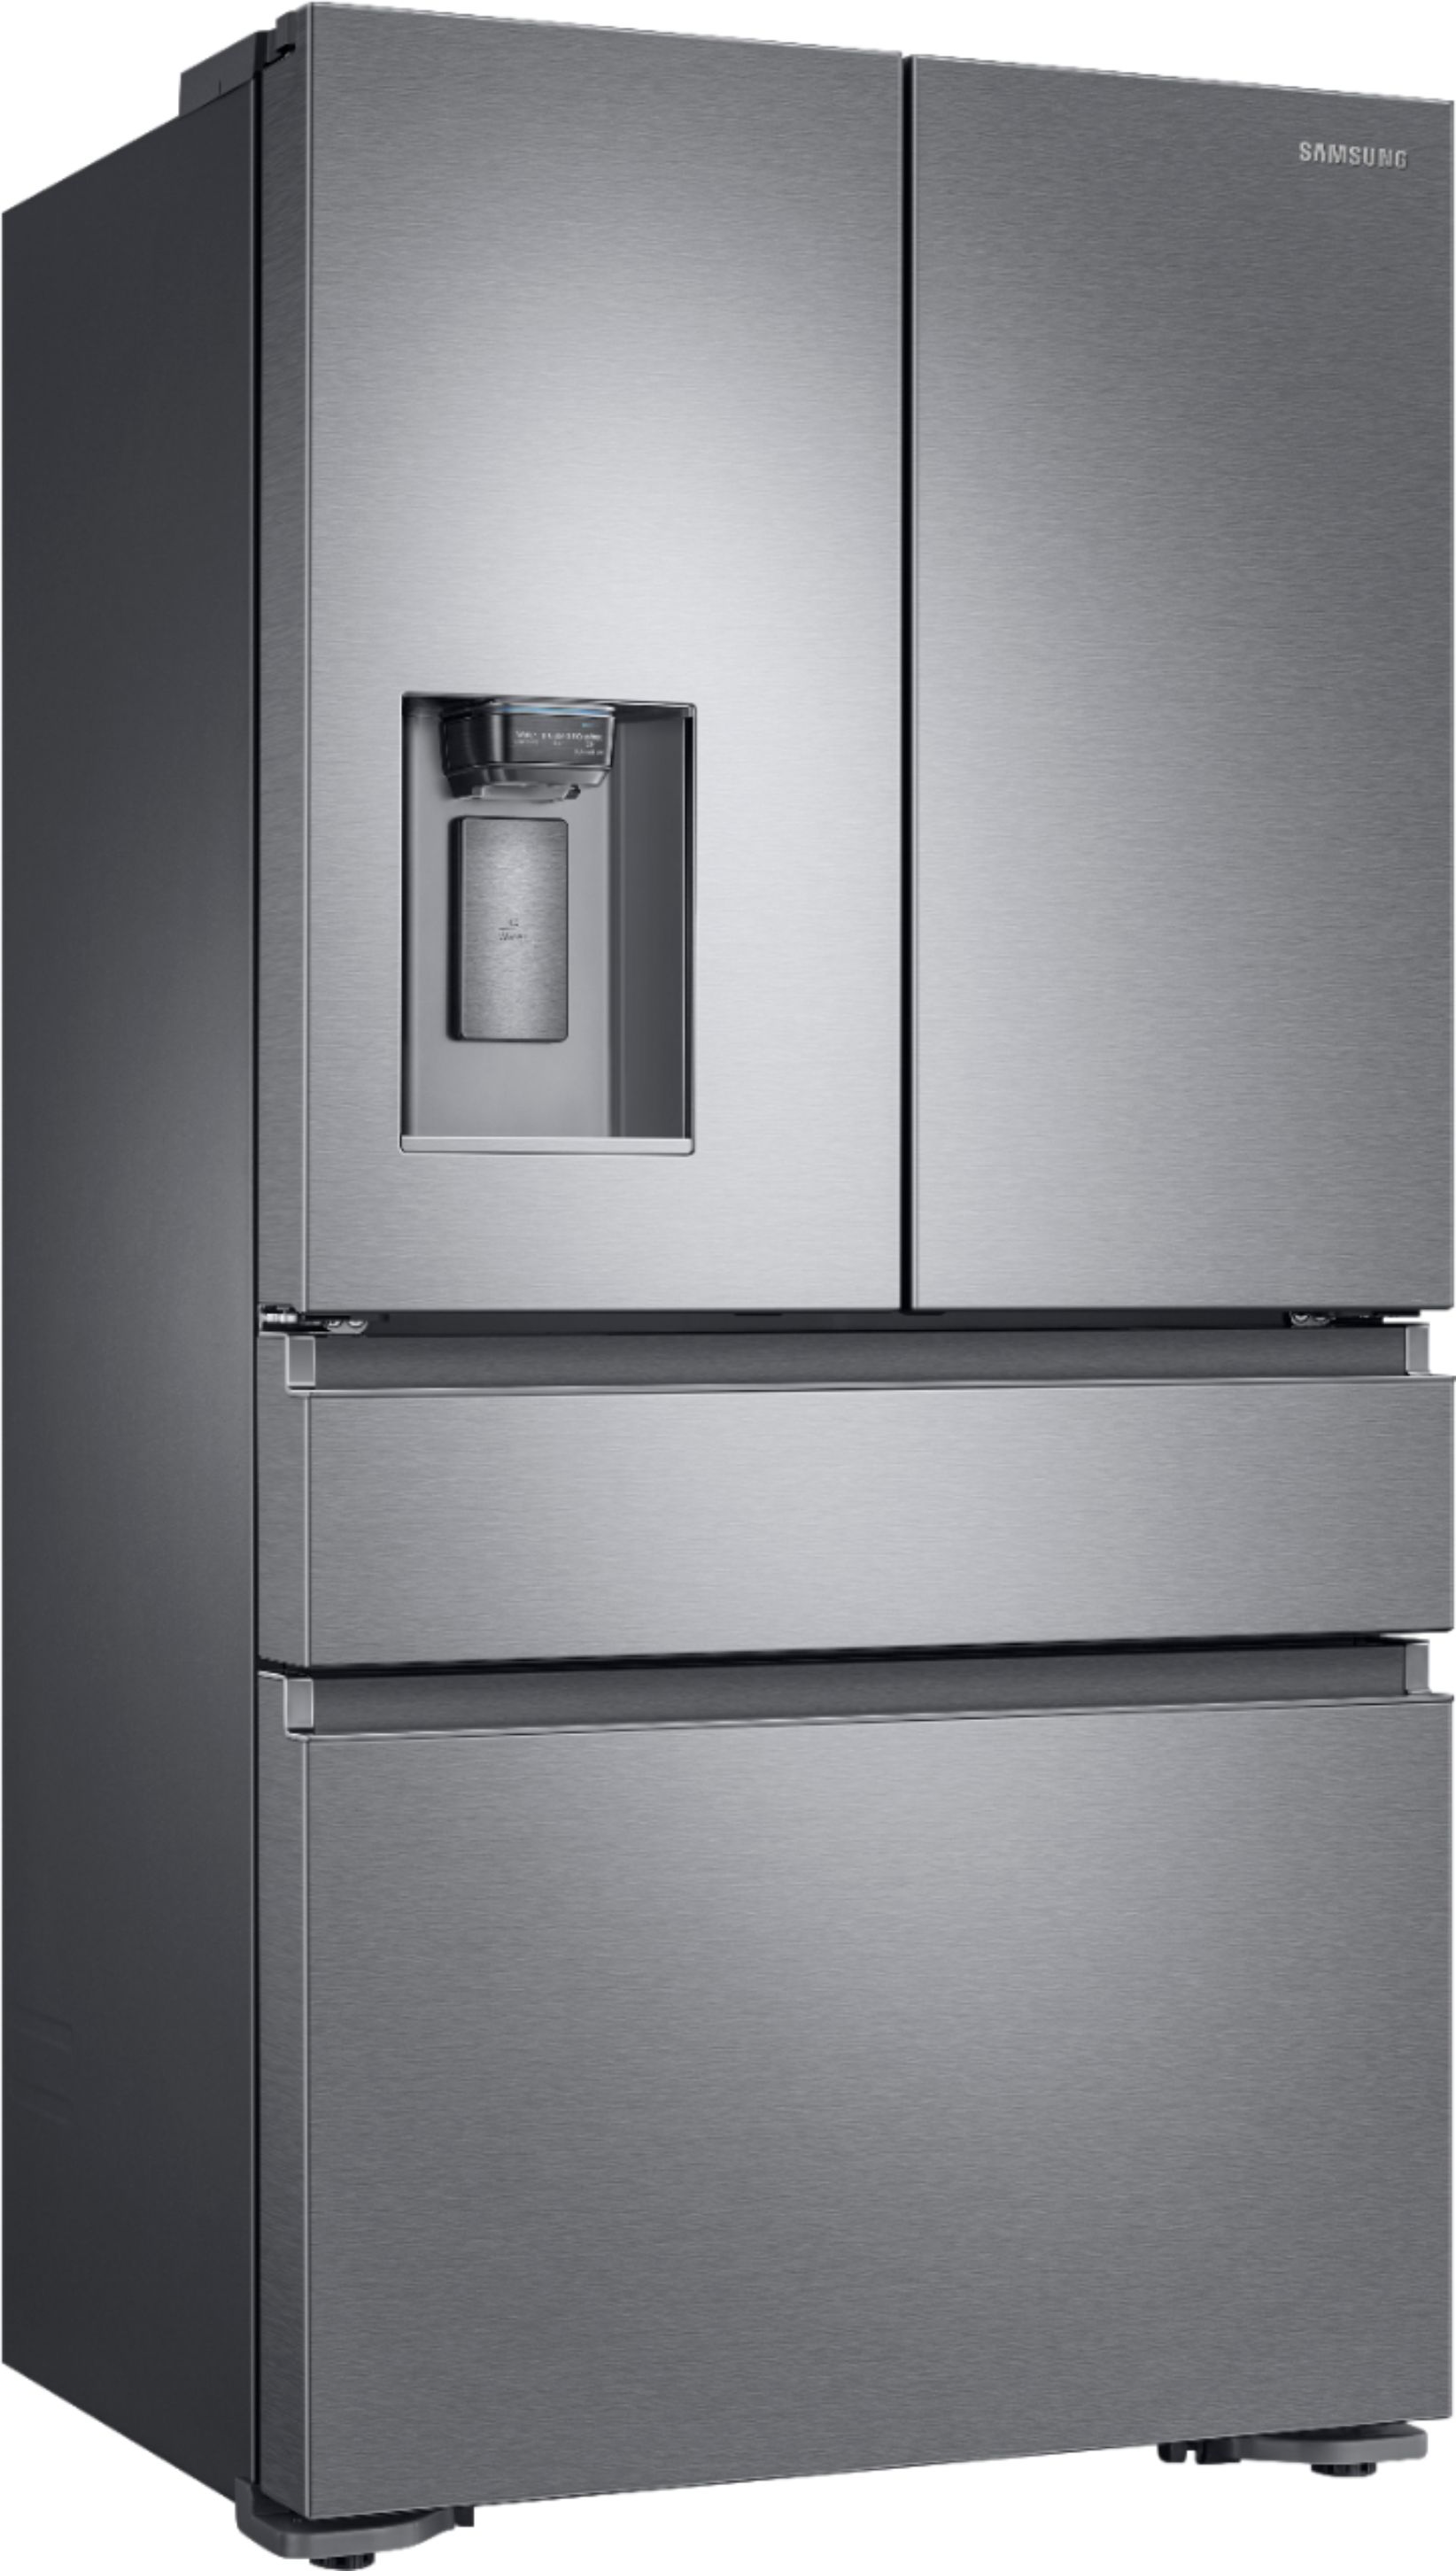 25 cu. ft. Side-by-Side Refrigerator with LED Lighting in Black Stainless  Steel Refrigerator - RS25J500DSG/AA